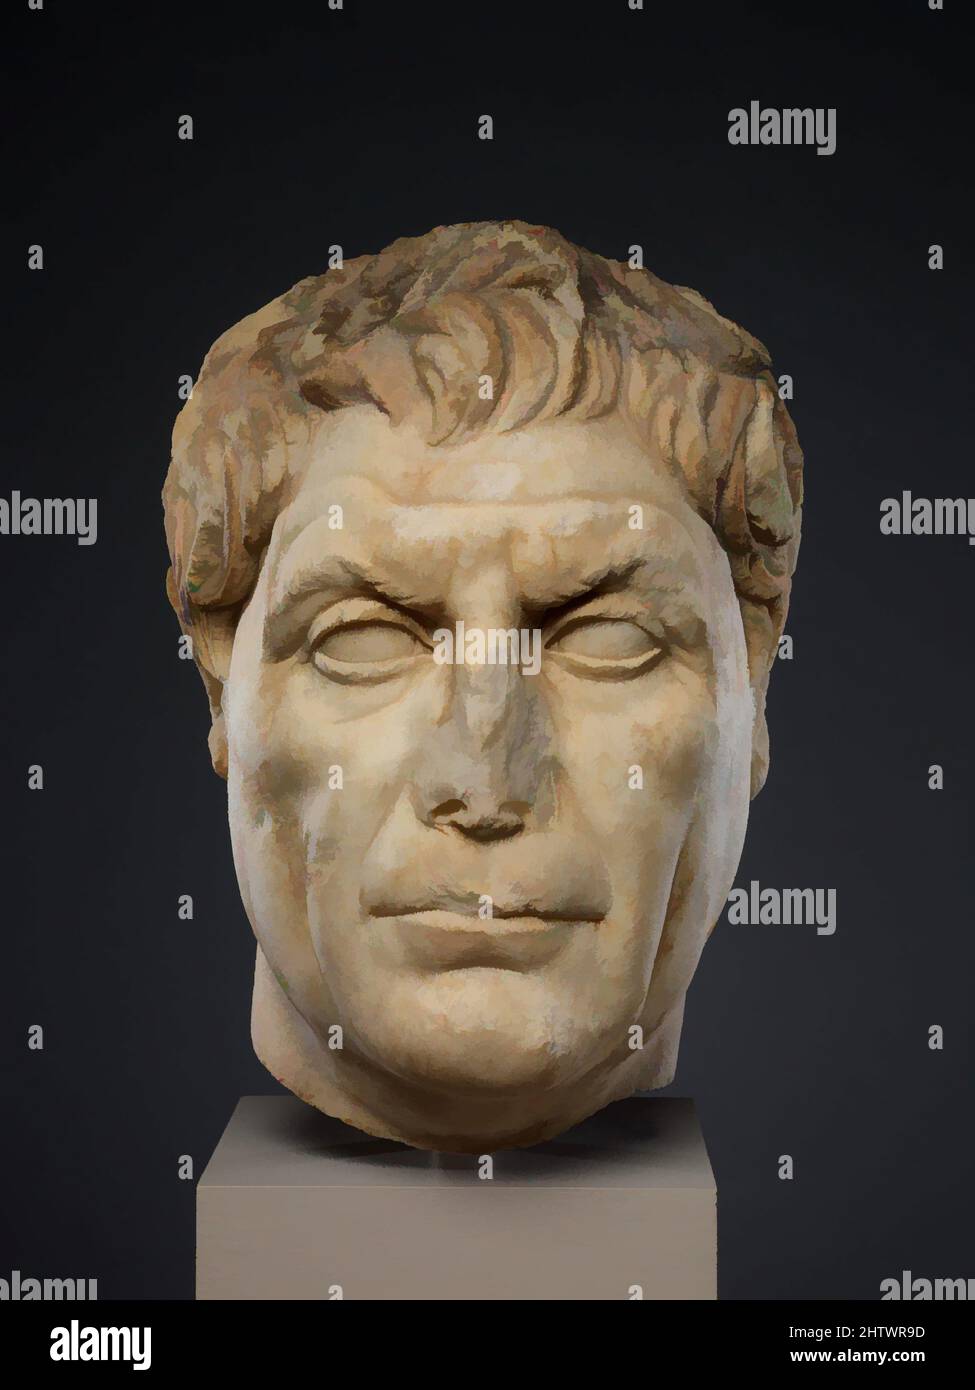 Art inspired by Marble portrait of a man, Imperial, Late Flavian or Early Trajanic, ca. A.D. 100, Roman, Marble, H. 11 3/16 in. (28.4 cm), Stone Sculpture, Like this powerful image of a middle-aged man, many Flavian portraits show the same uncompromising representation of aging flesh, Classic works modernized by Artotop with a splash of modernity. Shapes, color and value, eye-catching visual impact on art. Emotions through freedom of artworks in a contemporary way. A timeless message pursuing a wildly creative new direction. Artists turning to the digital medium and creating the Artotop NFT Stock Photo